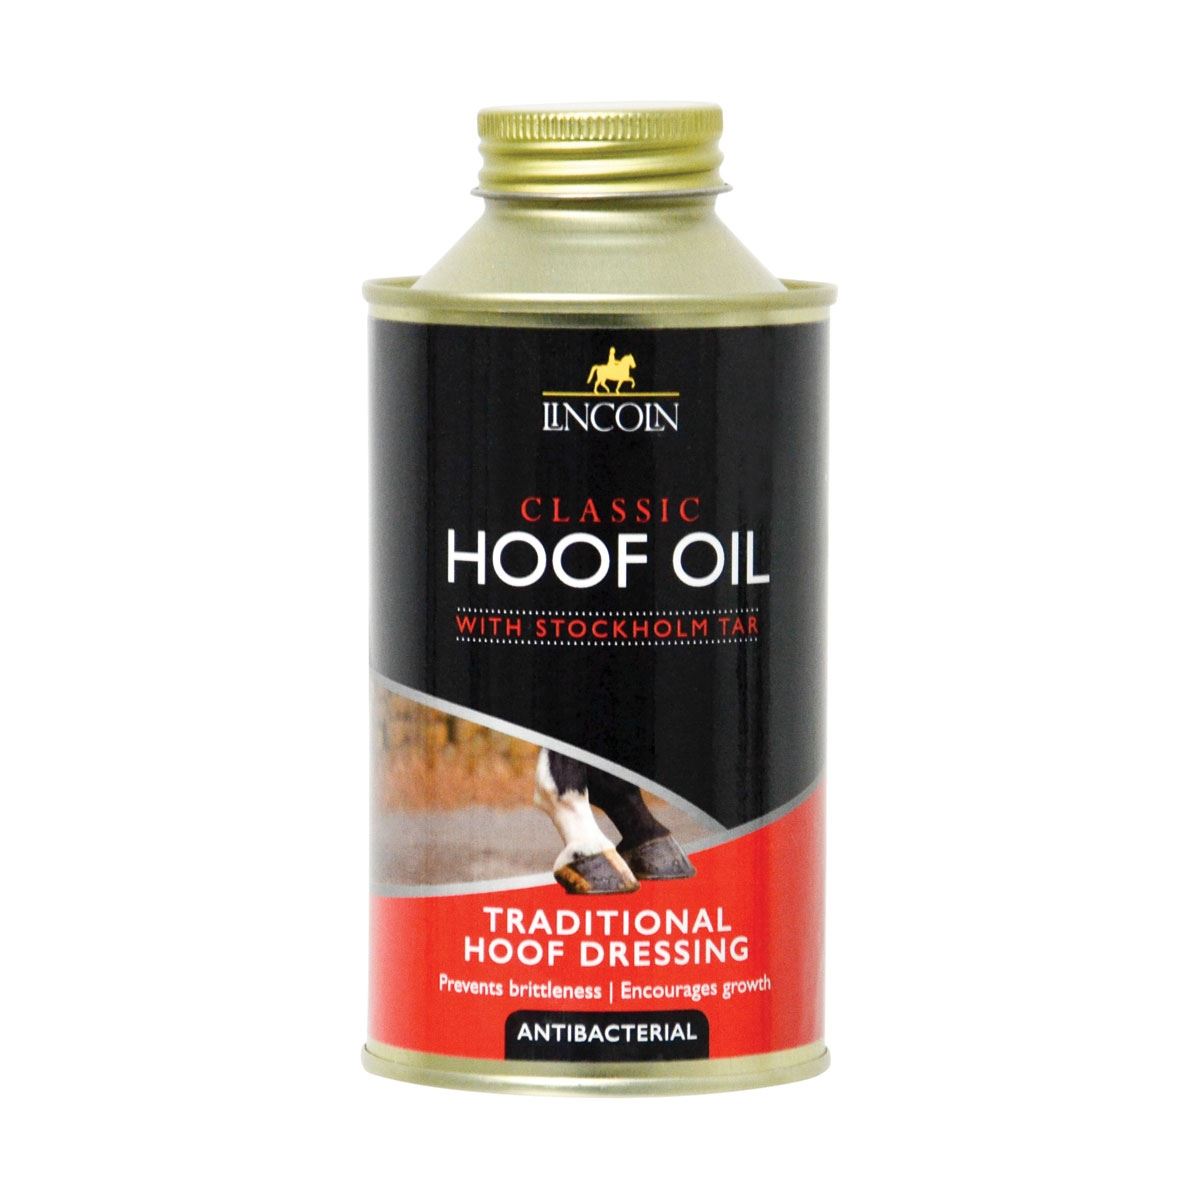 Lincoln Classic Hoof Oil for Improved Hoof Condition